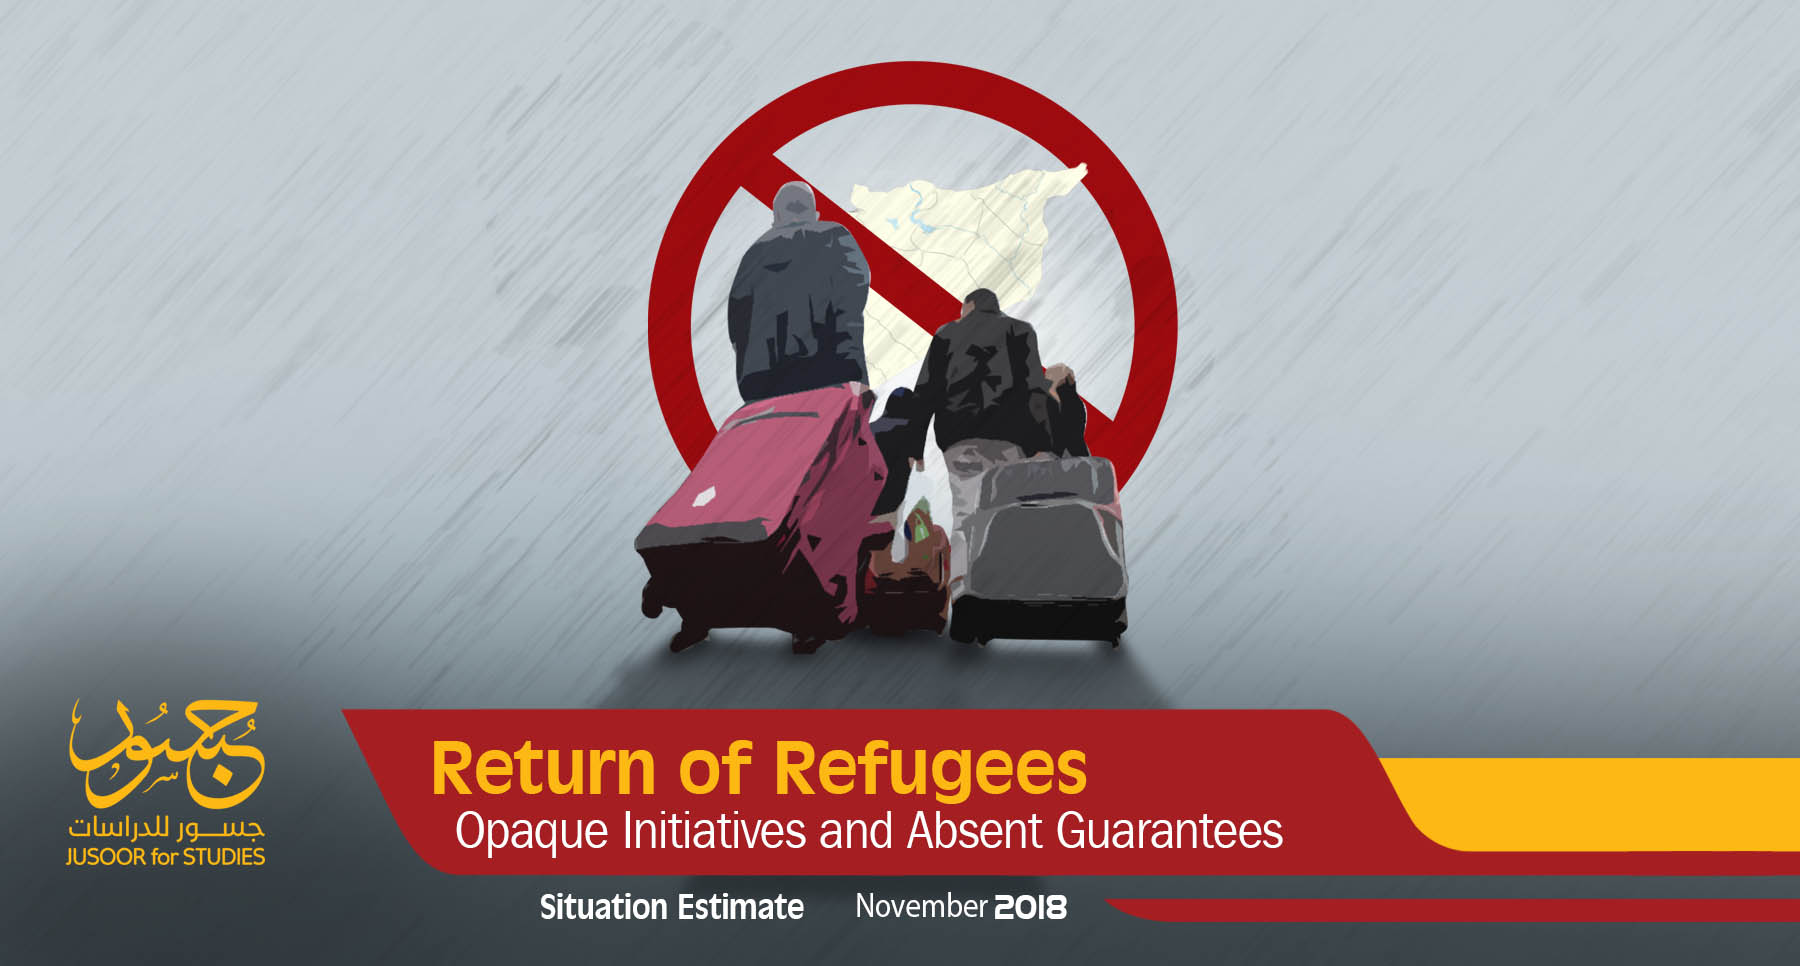 Return of Refugees Opaque Initiatives and Absent Guarantee